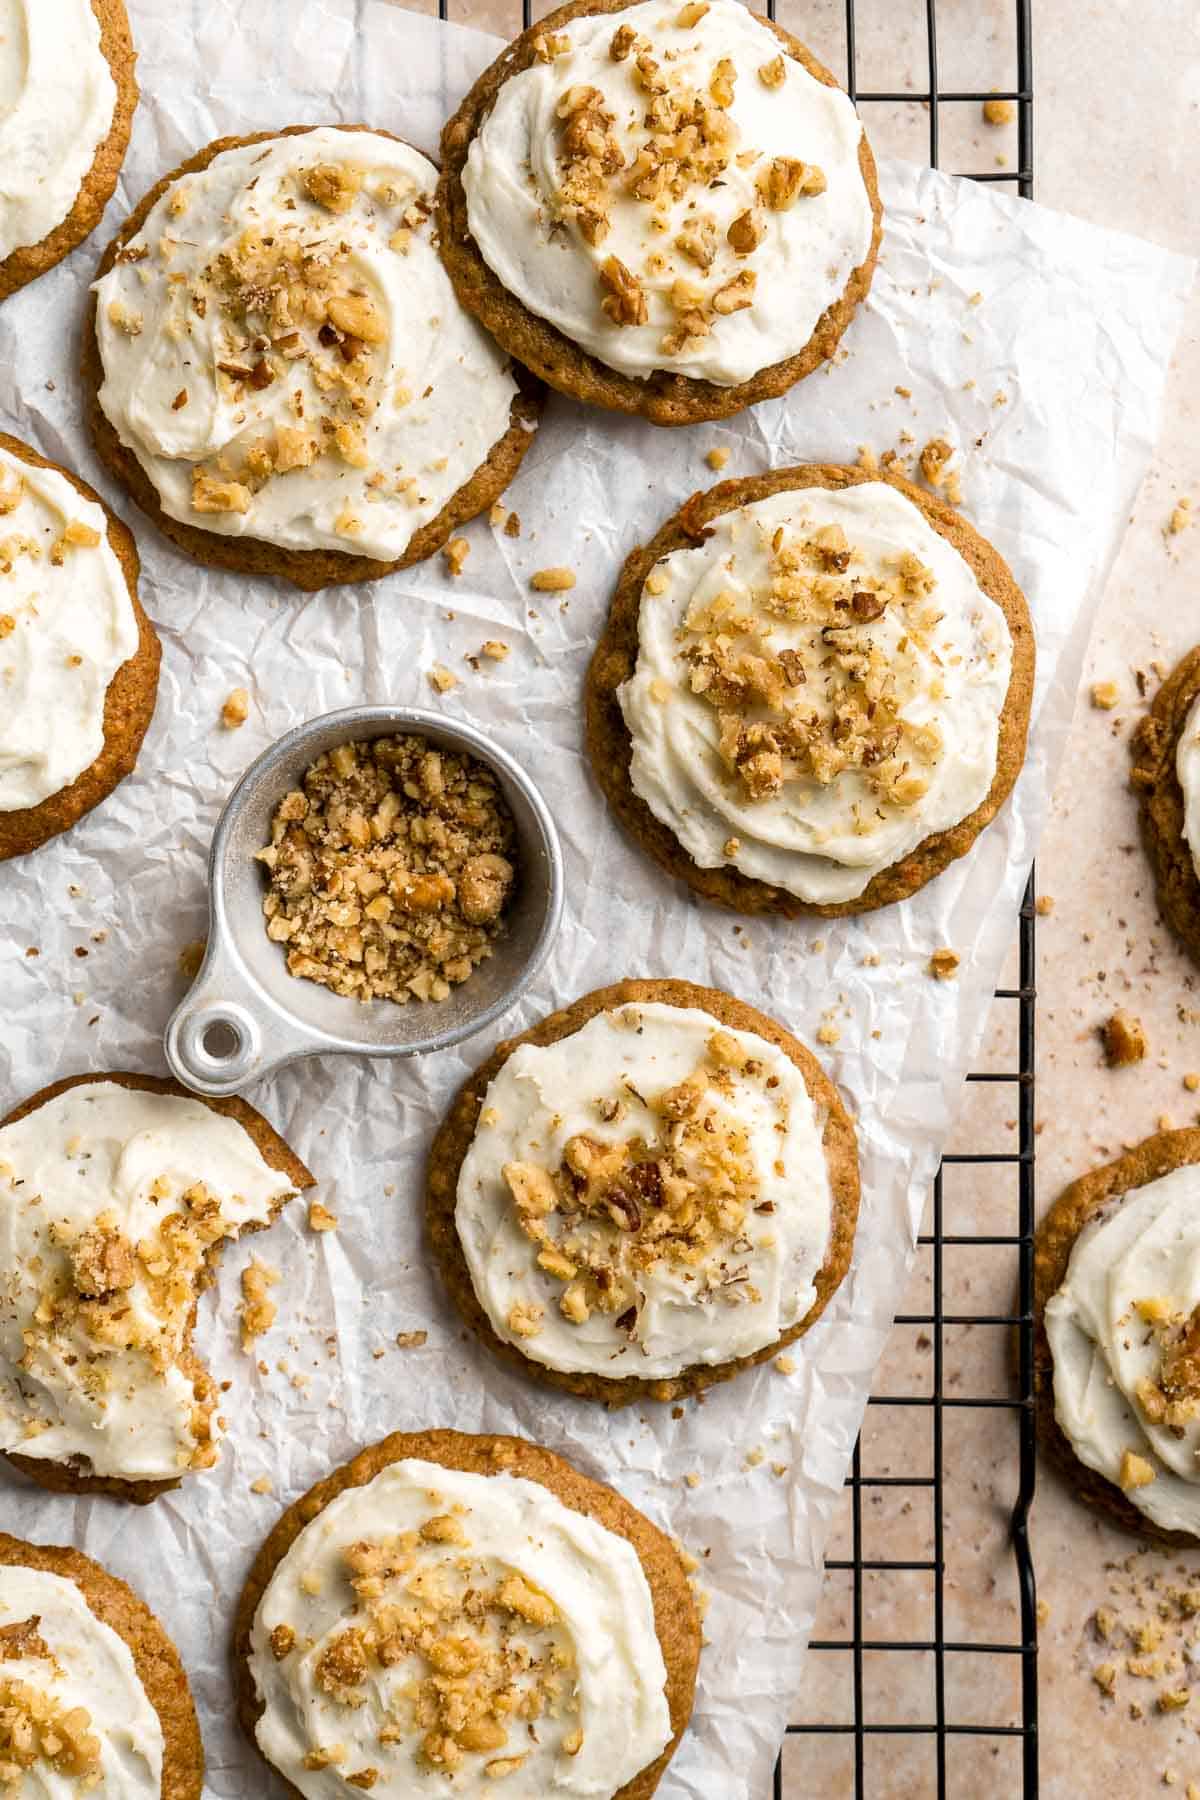 Carrot Cake Cookies are soft, chewy, cake-like cookies with a delicious homemade cream cheese glaze. They taste just like carrot cake but in cookie form. | aheadofthyme.com